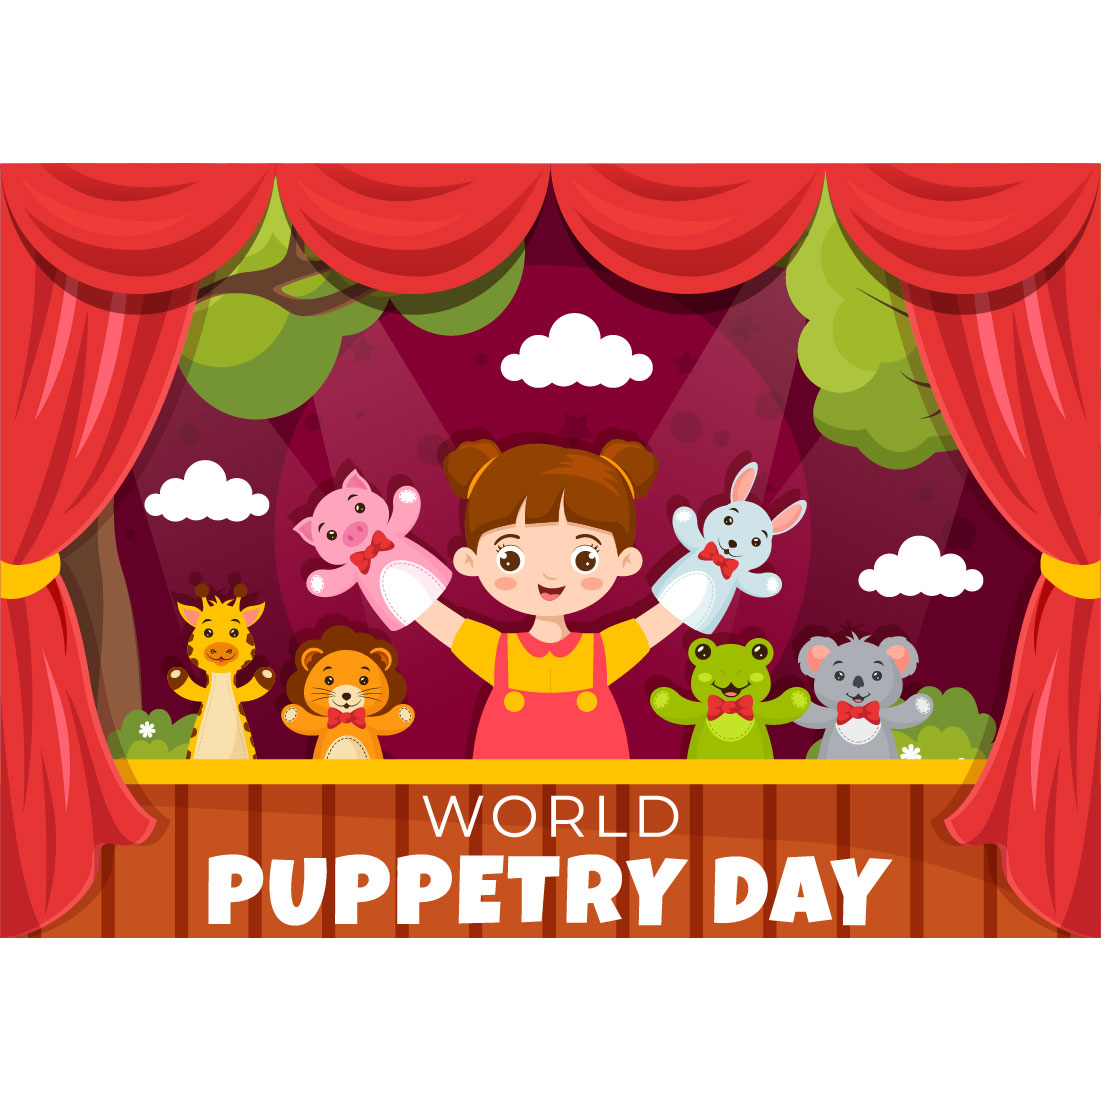 12 World Puppetry Day Illustration cover image.